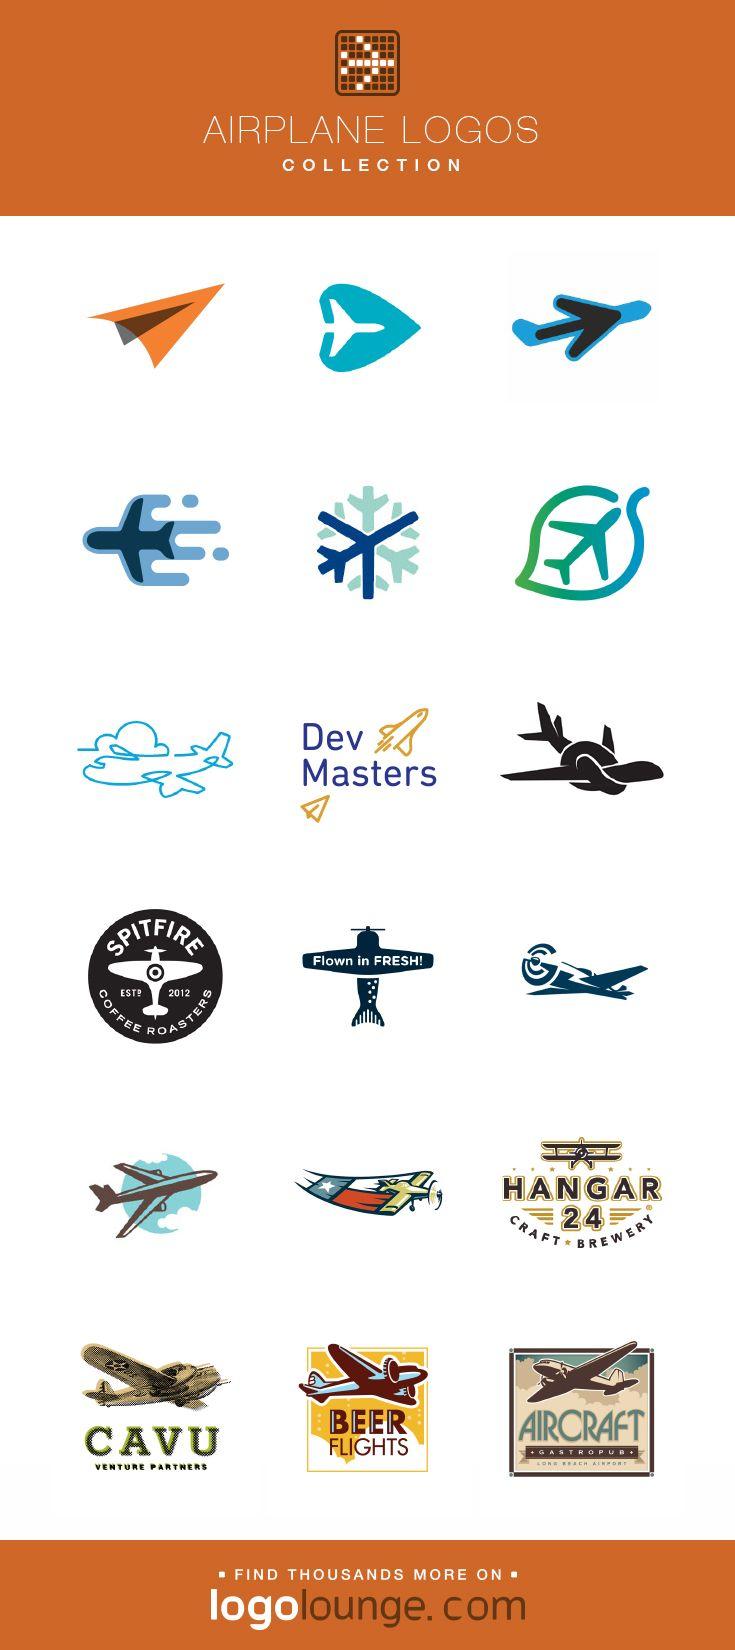 Best Known for Its Airplanes Logo - Logo Collections : Airplane vector logo design. Plane, wings, air ...